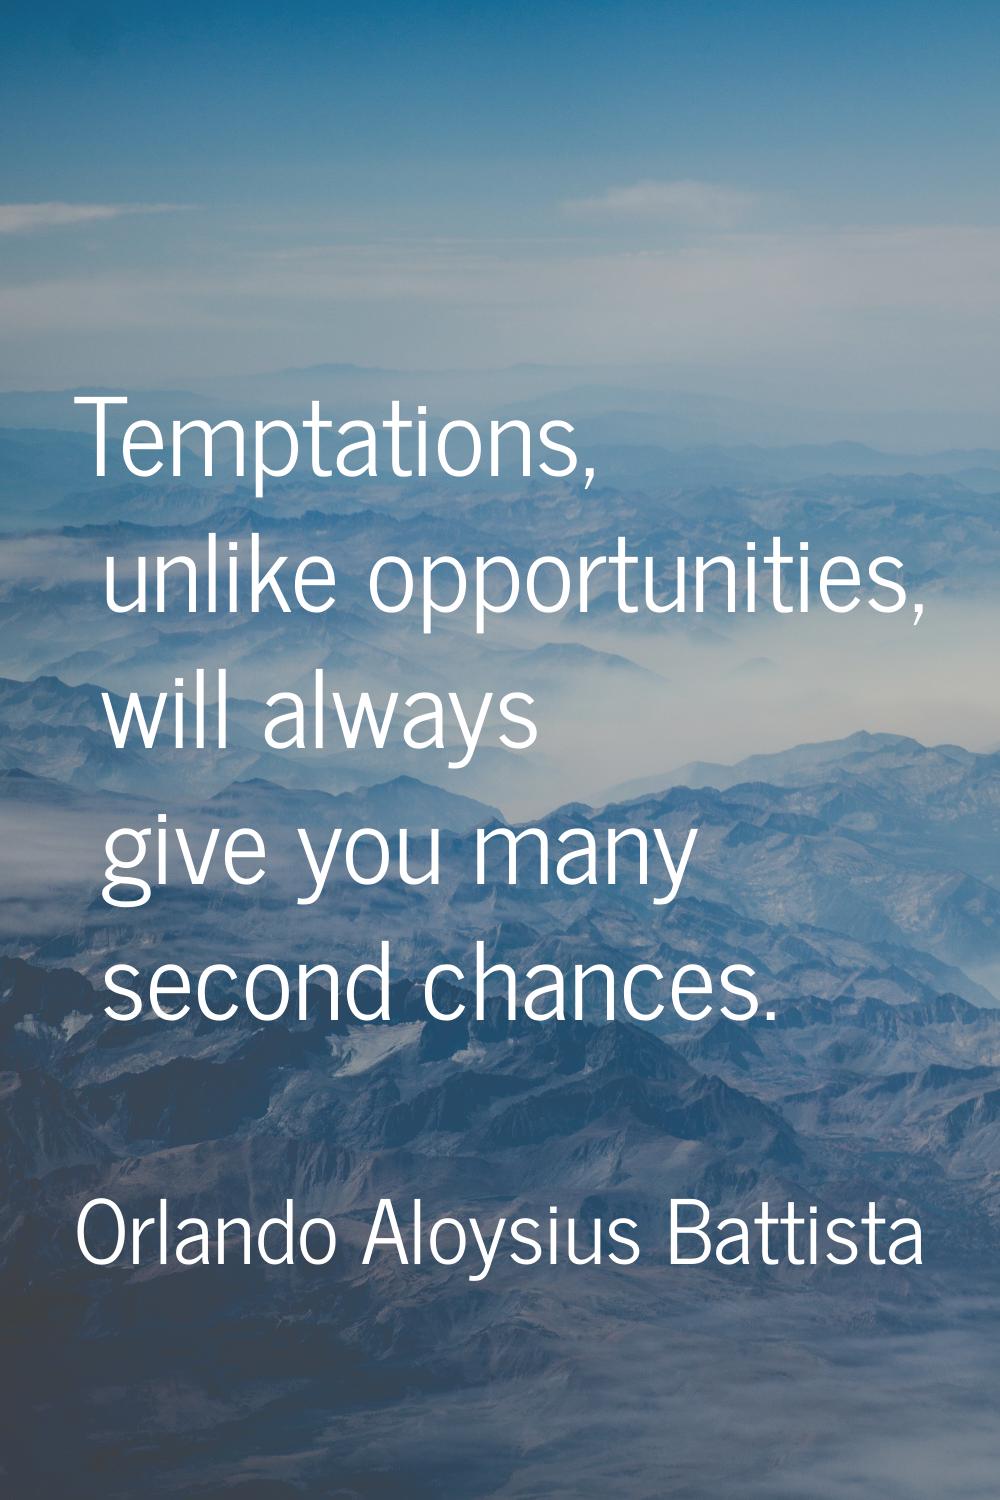 Temptations, unlike opportunities, will always give you many second chances.